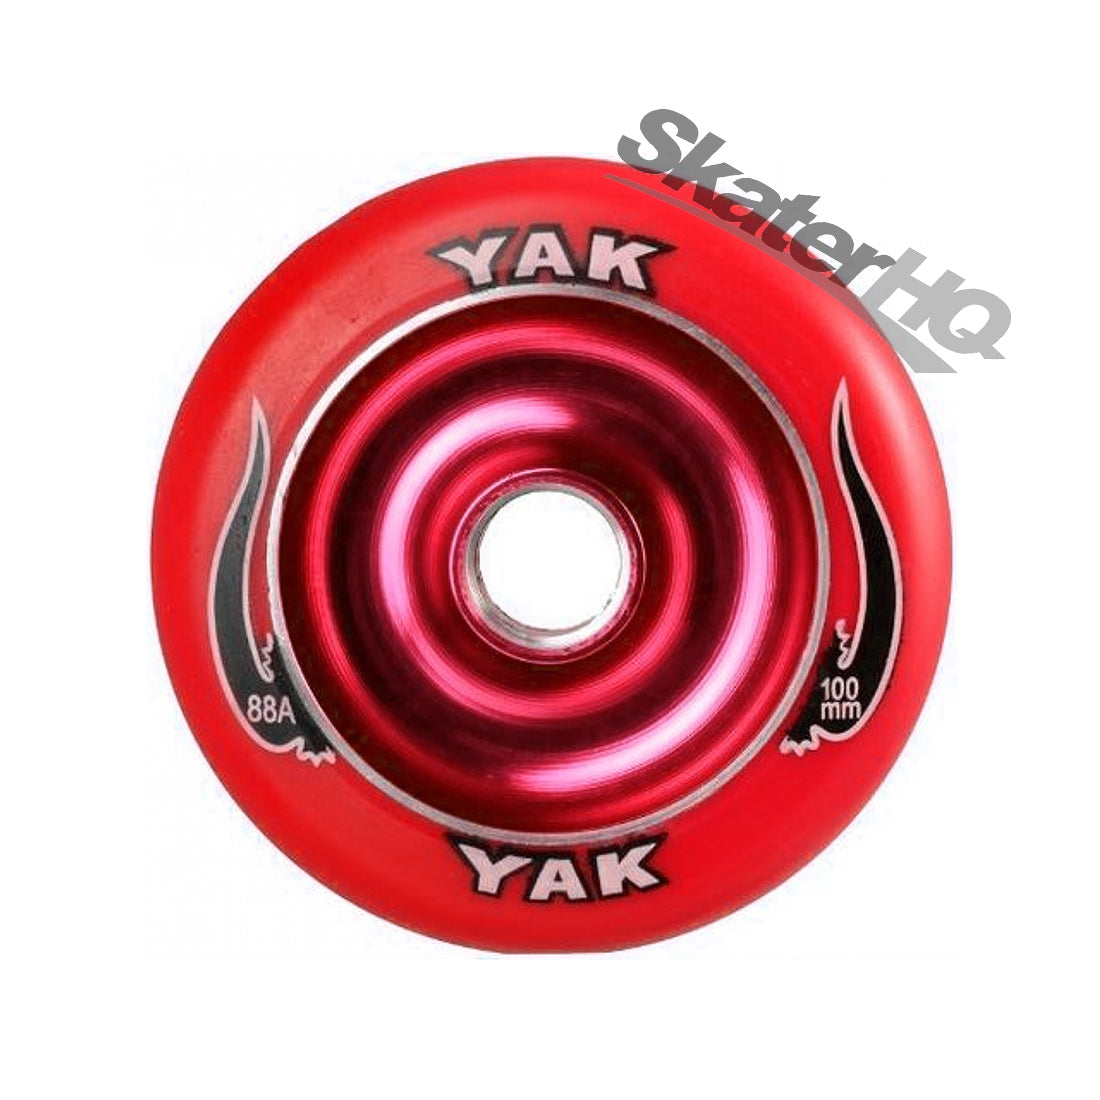 Yak Scat 100mm 88a Metalcore - Red Scooter Wheels